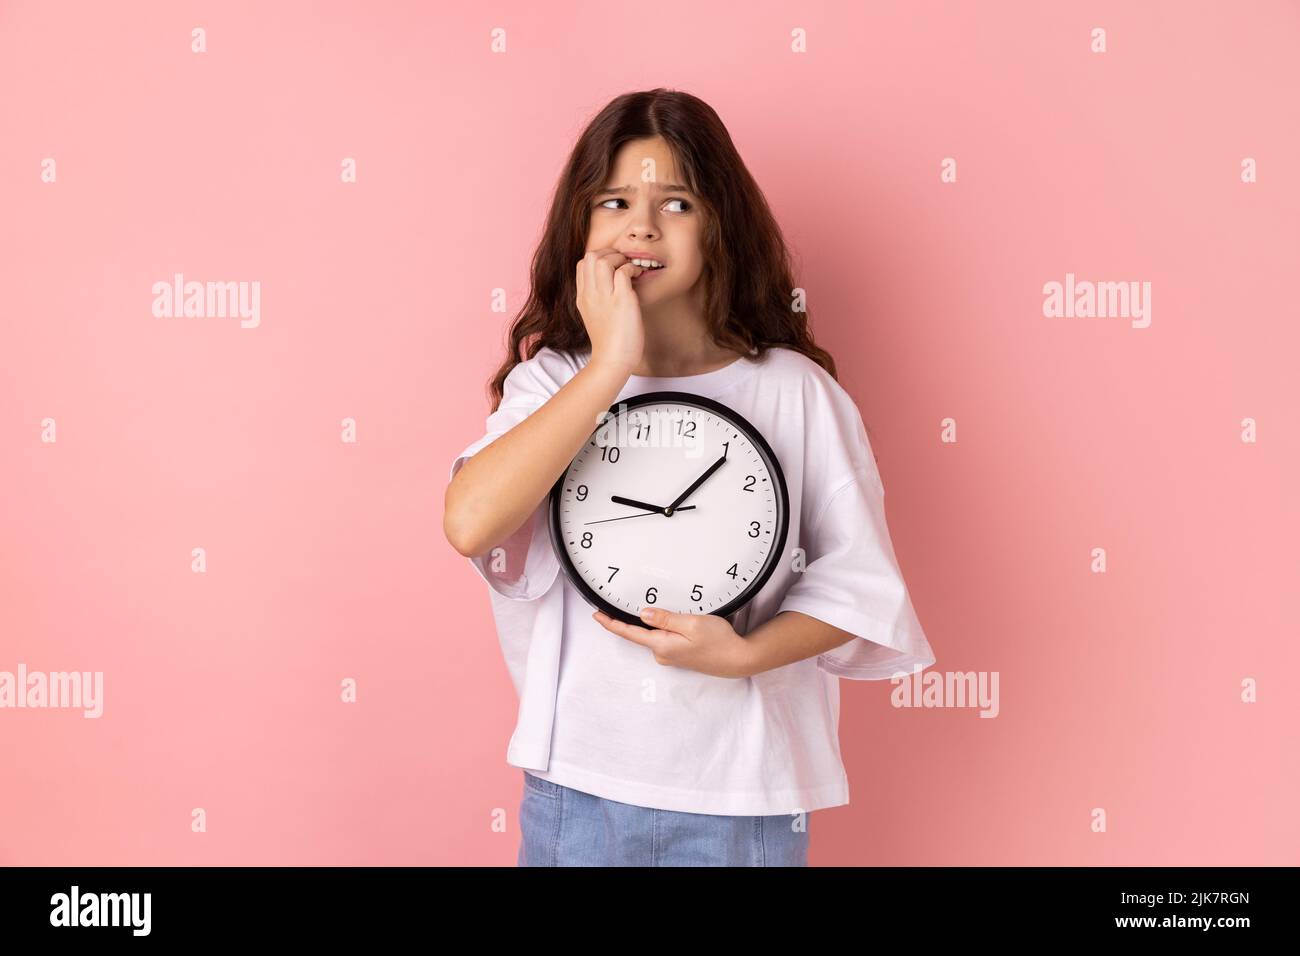 Portrait of nervous anxious little girl wearing white T-shirt biting nails on fingers holding big wall clock in hand, worried about deadline. Indoor studio shot isolated on pink background. Stock Photo